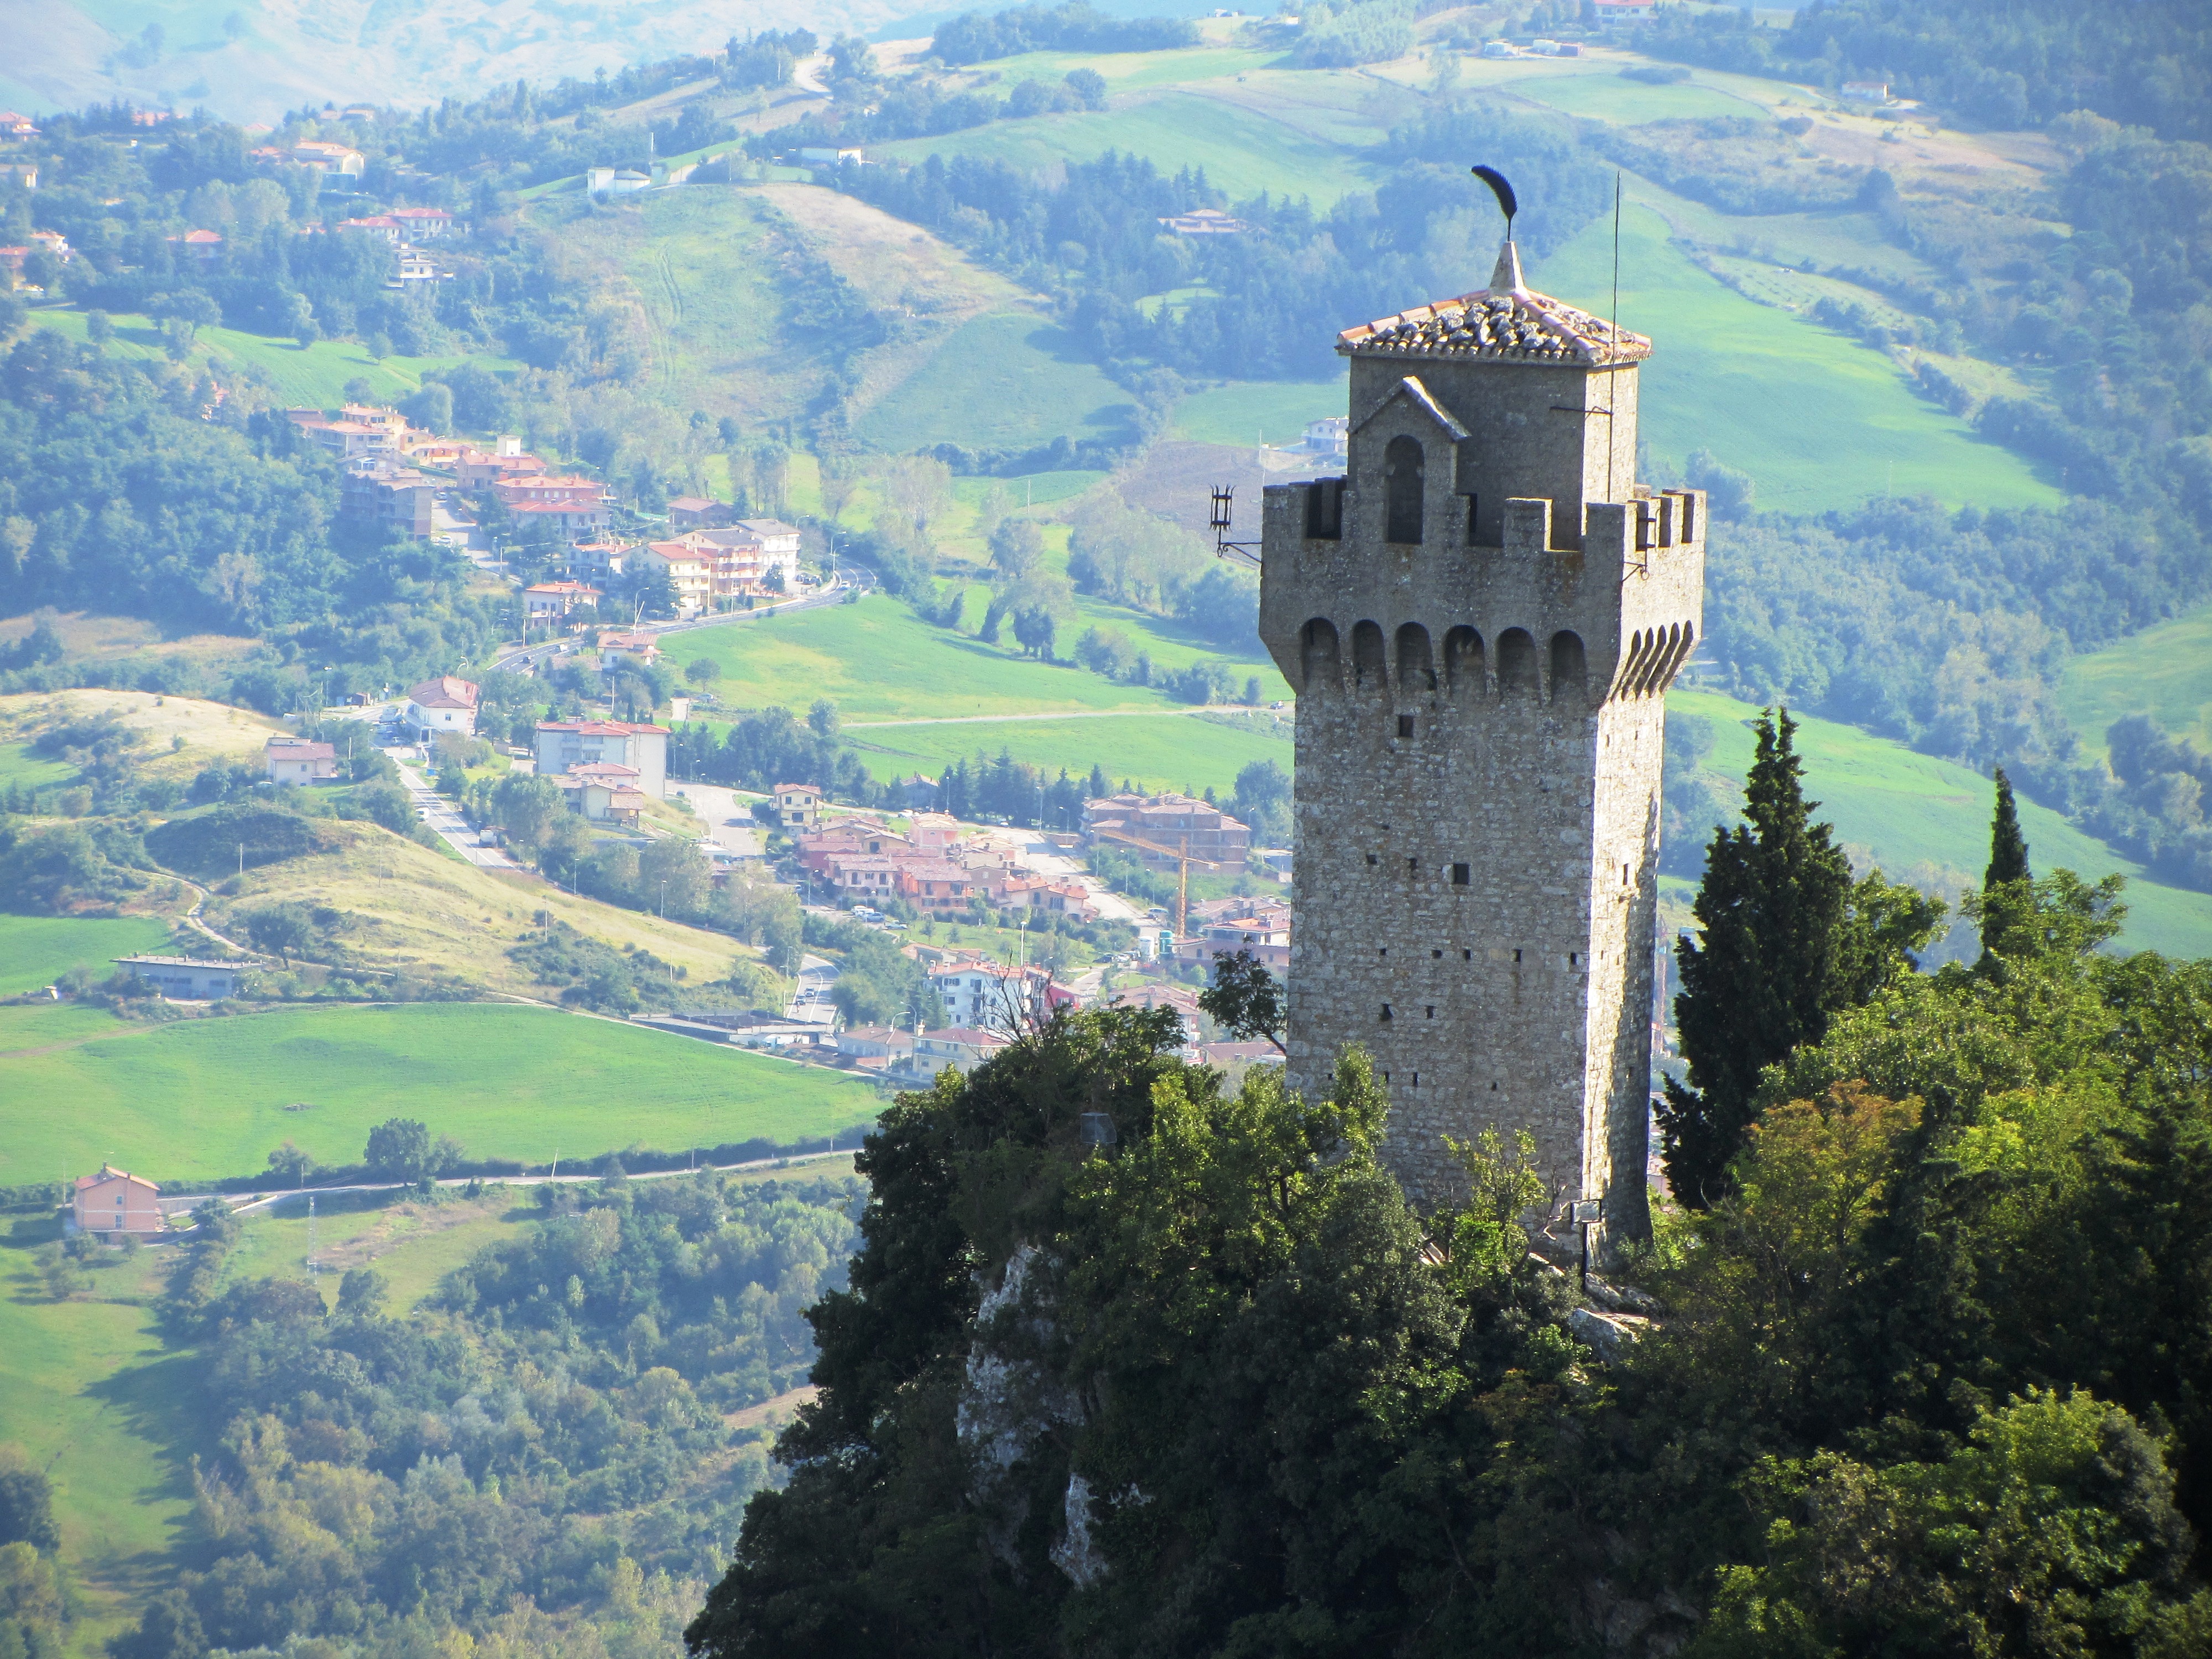 San Marino makes up for its small size